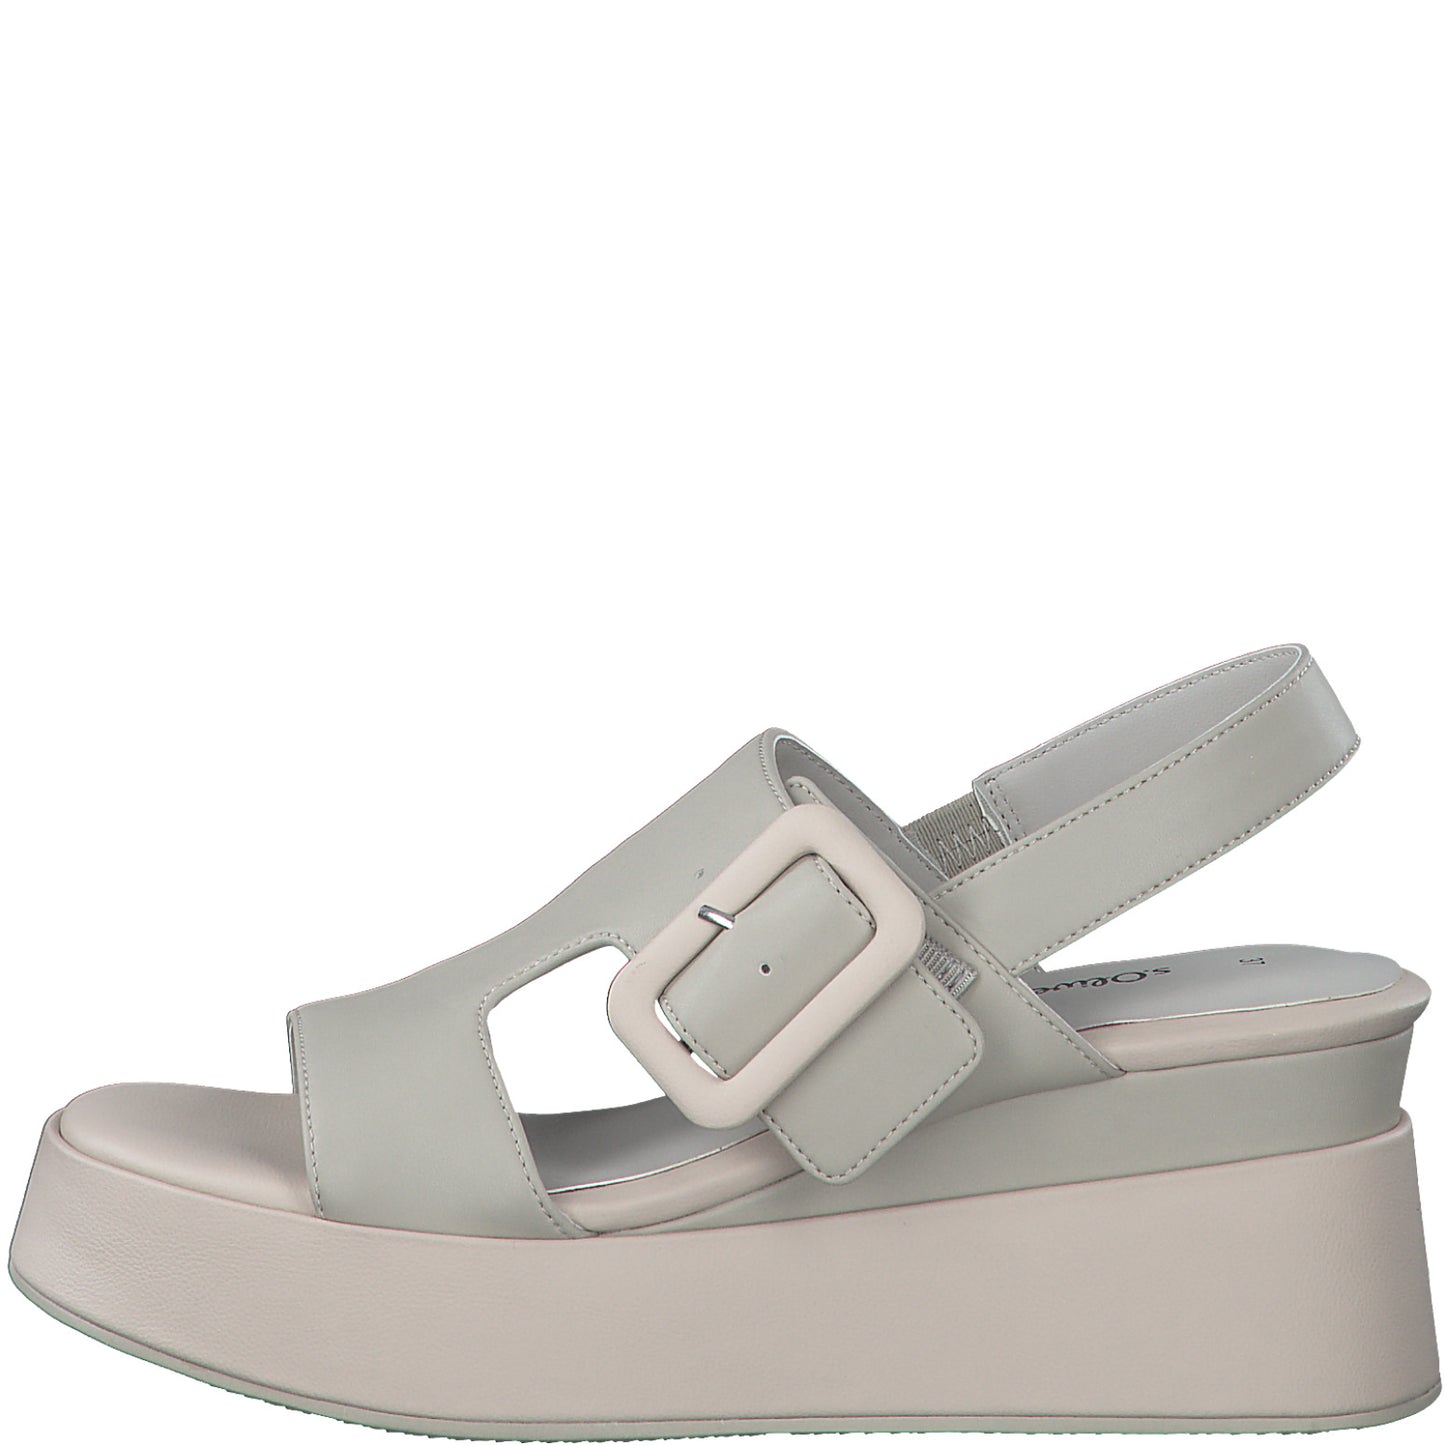 S.oliver Sandals  Taupe